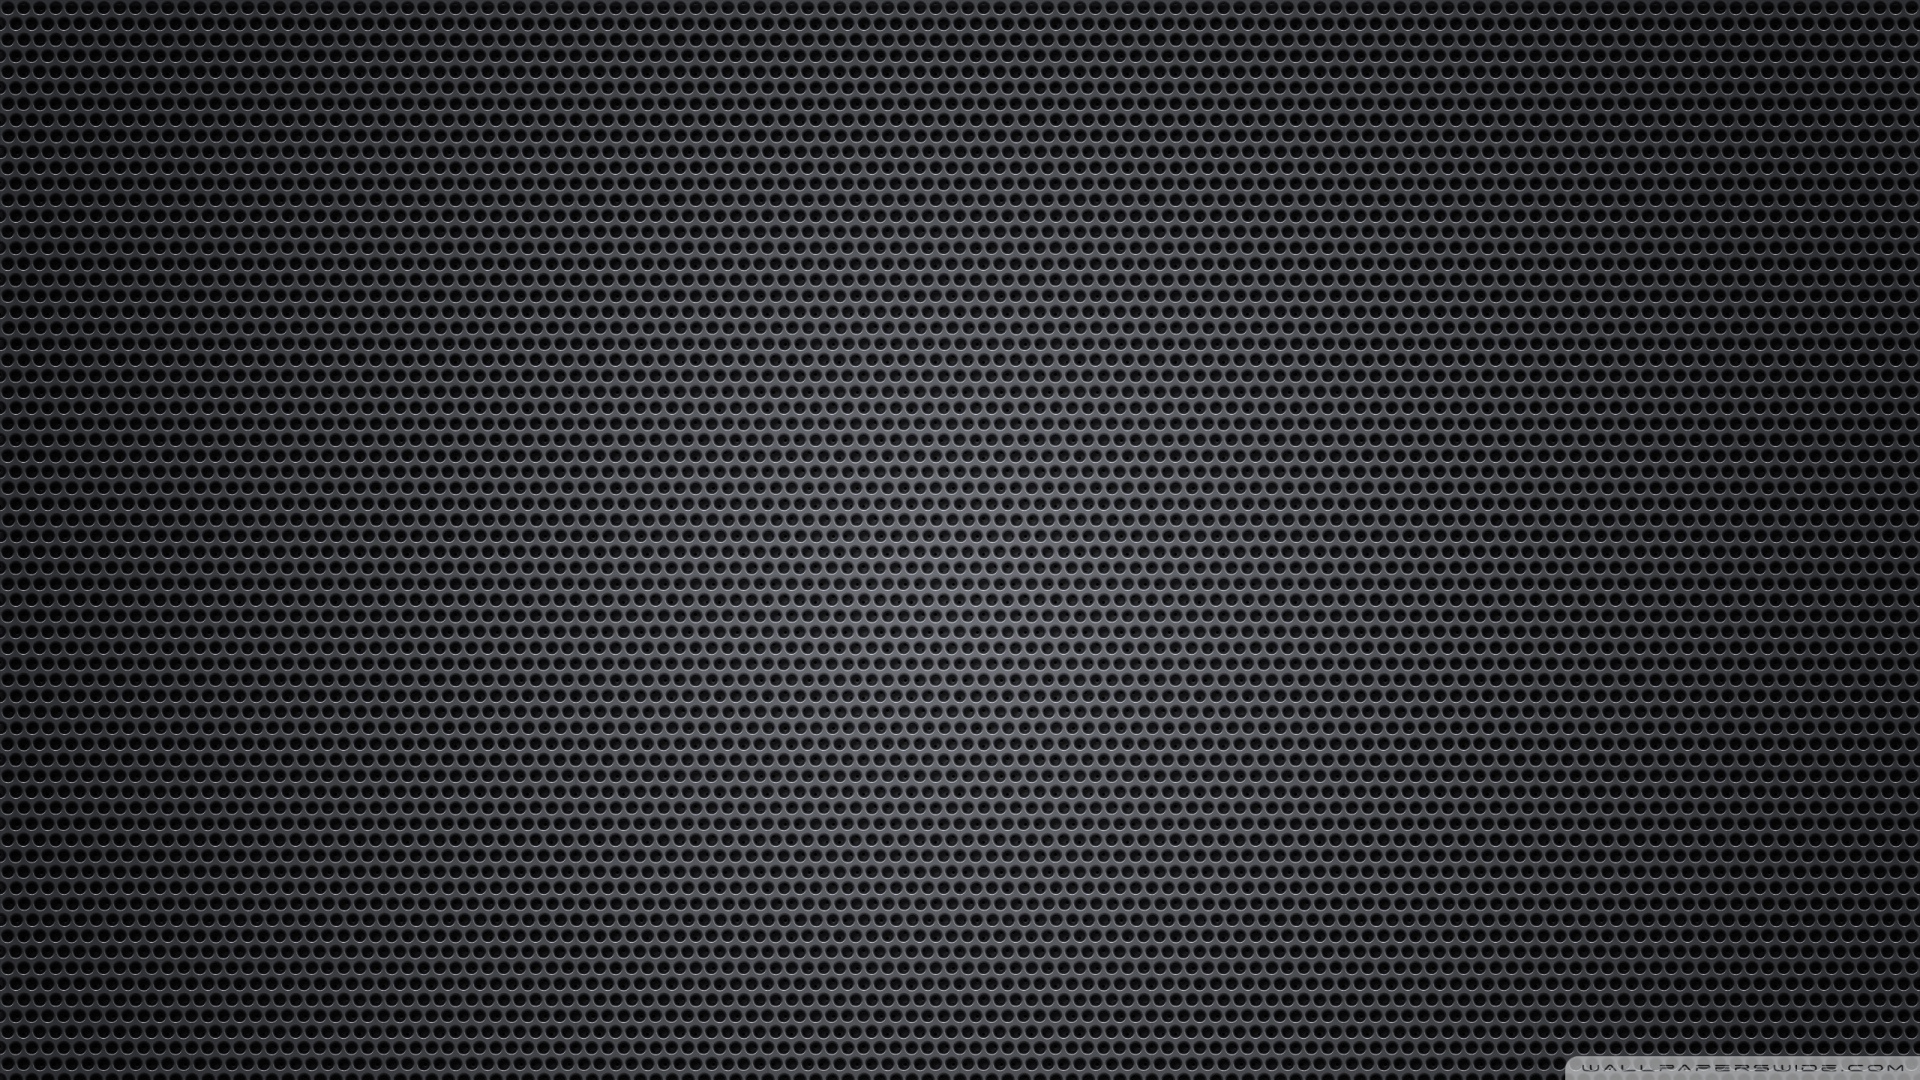 Background Metal Hole Small I Wallpaper Black